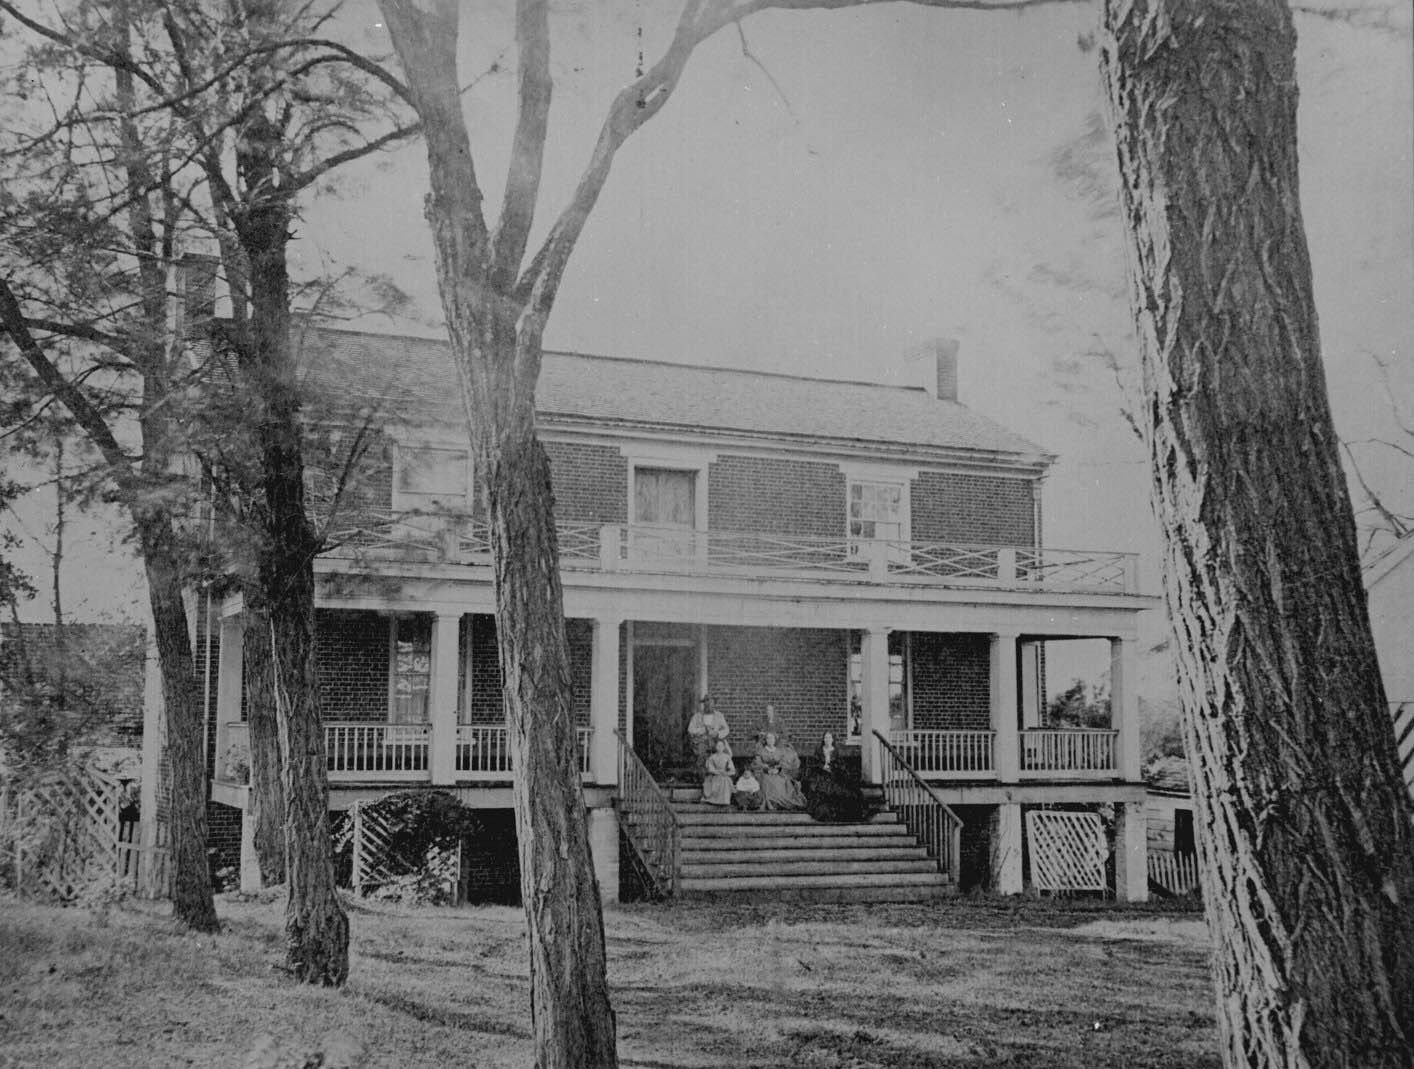 McLean house where General Lee surrendered. Appomattox Court House, Va., April 1865. Photographed by Timothy H. O'Sullivan.